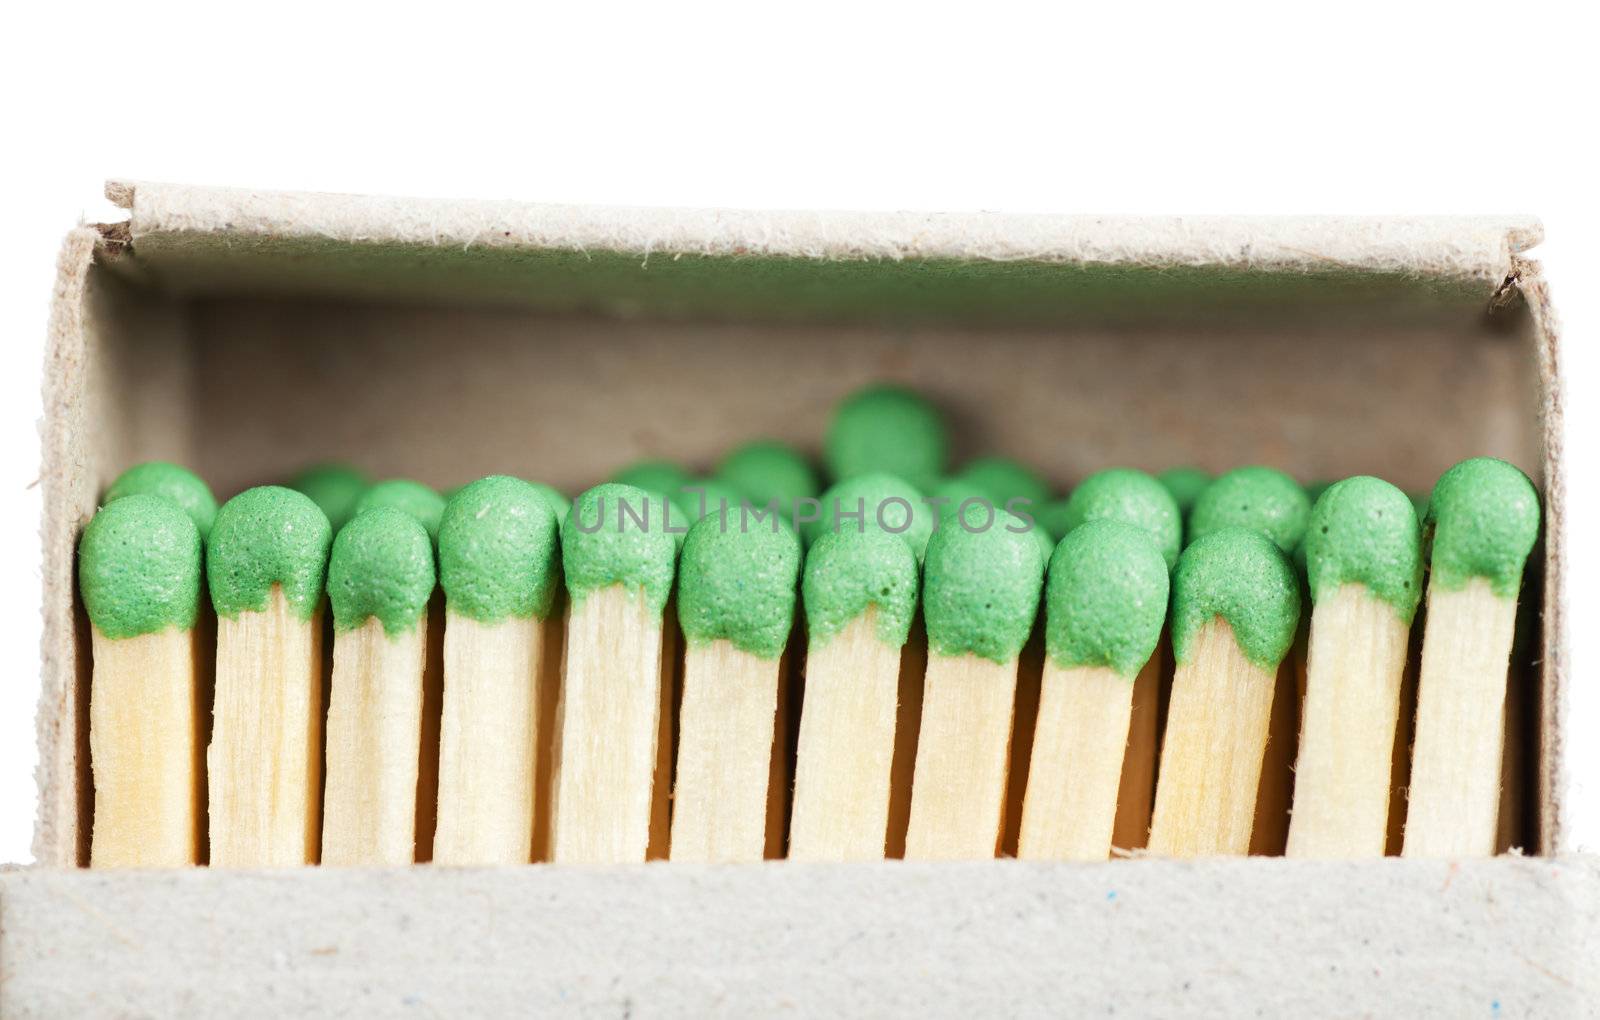 Matches in a box illustrating concept of cohesion